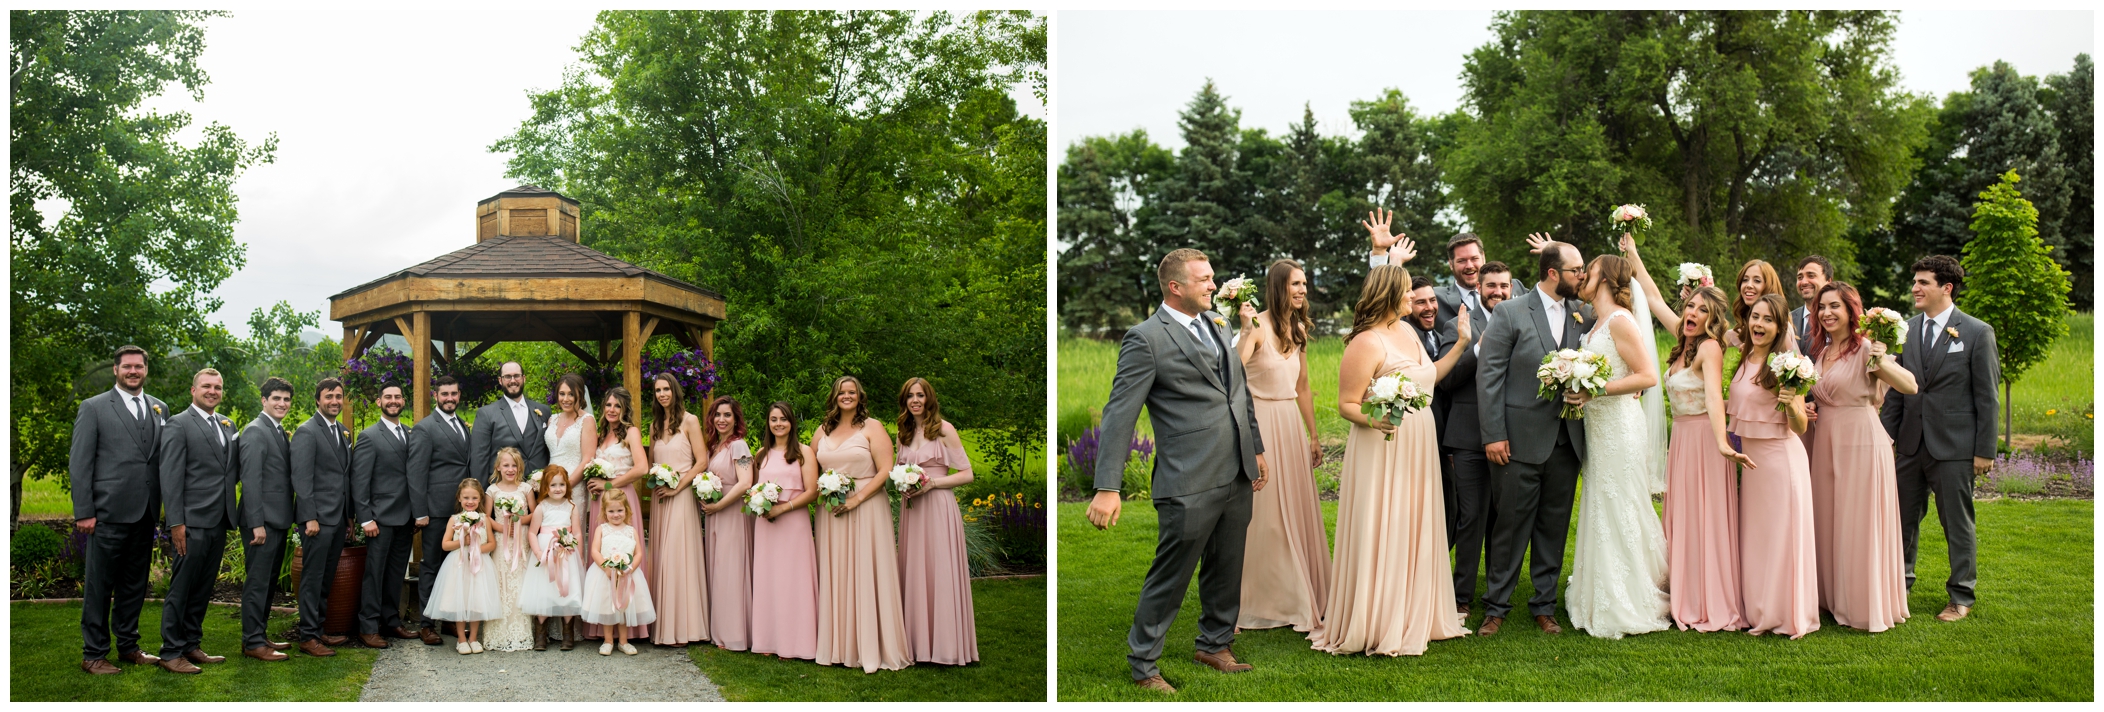 wedding party in pink and gray at Chatfield Farms wedding